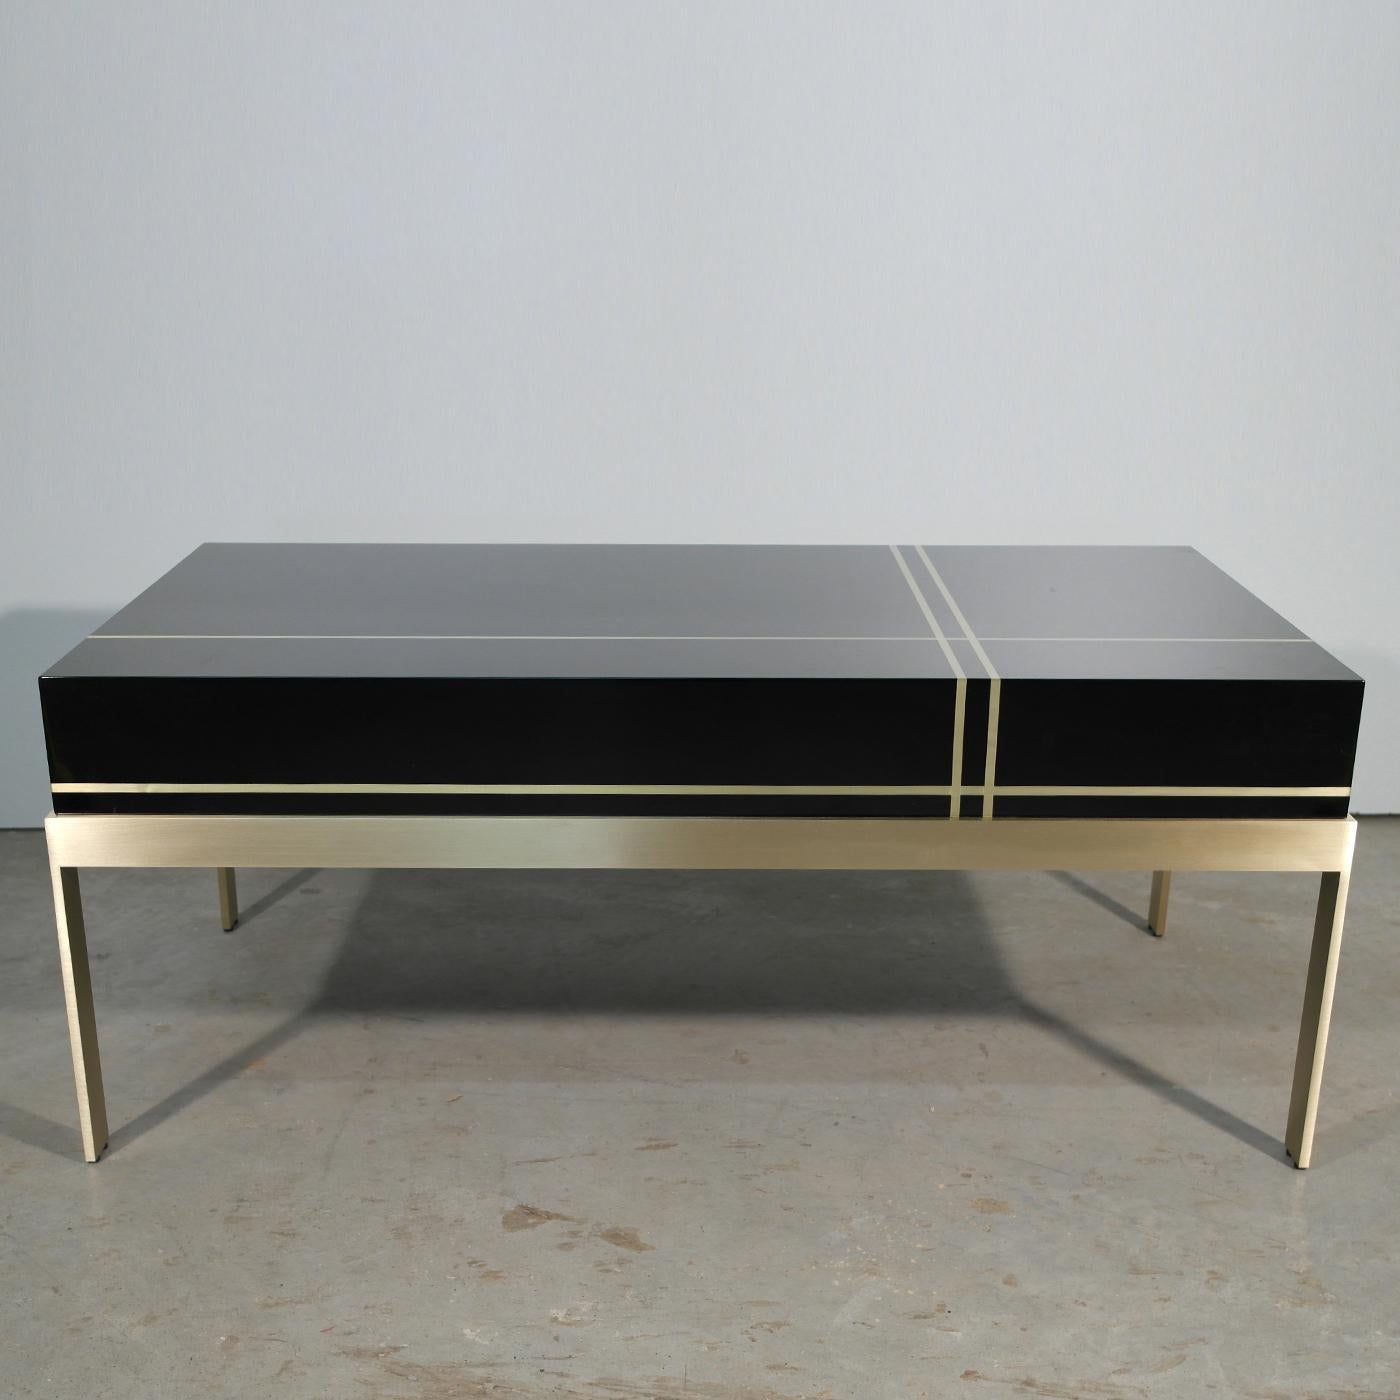 This beautiful coffee table makes a striking addition to any modern living room. Its polished brass base is topped with a black wood veneer top, embellished with decorative brass inlaid detailing. With its sleek lines, glossy textures and